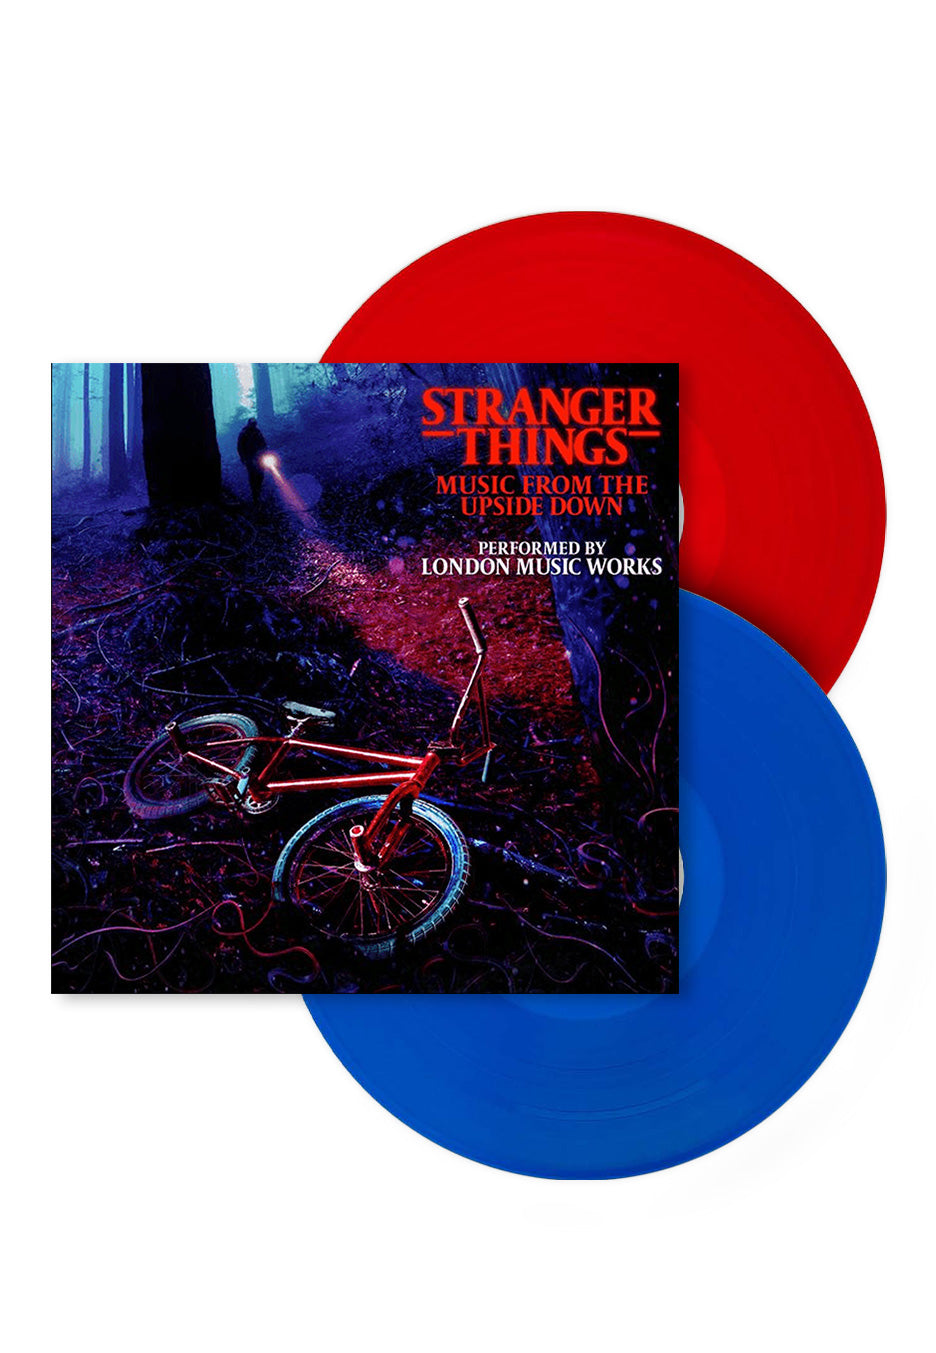 Stranger Things - Music From The Upside Down (London Music Works) Red & Blue - Colored 2 Vinyl